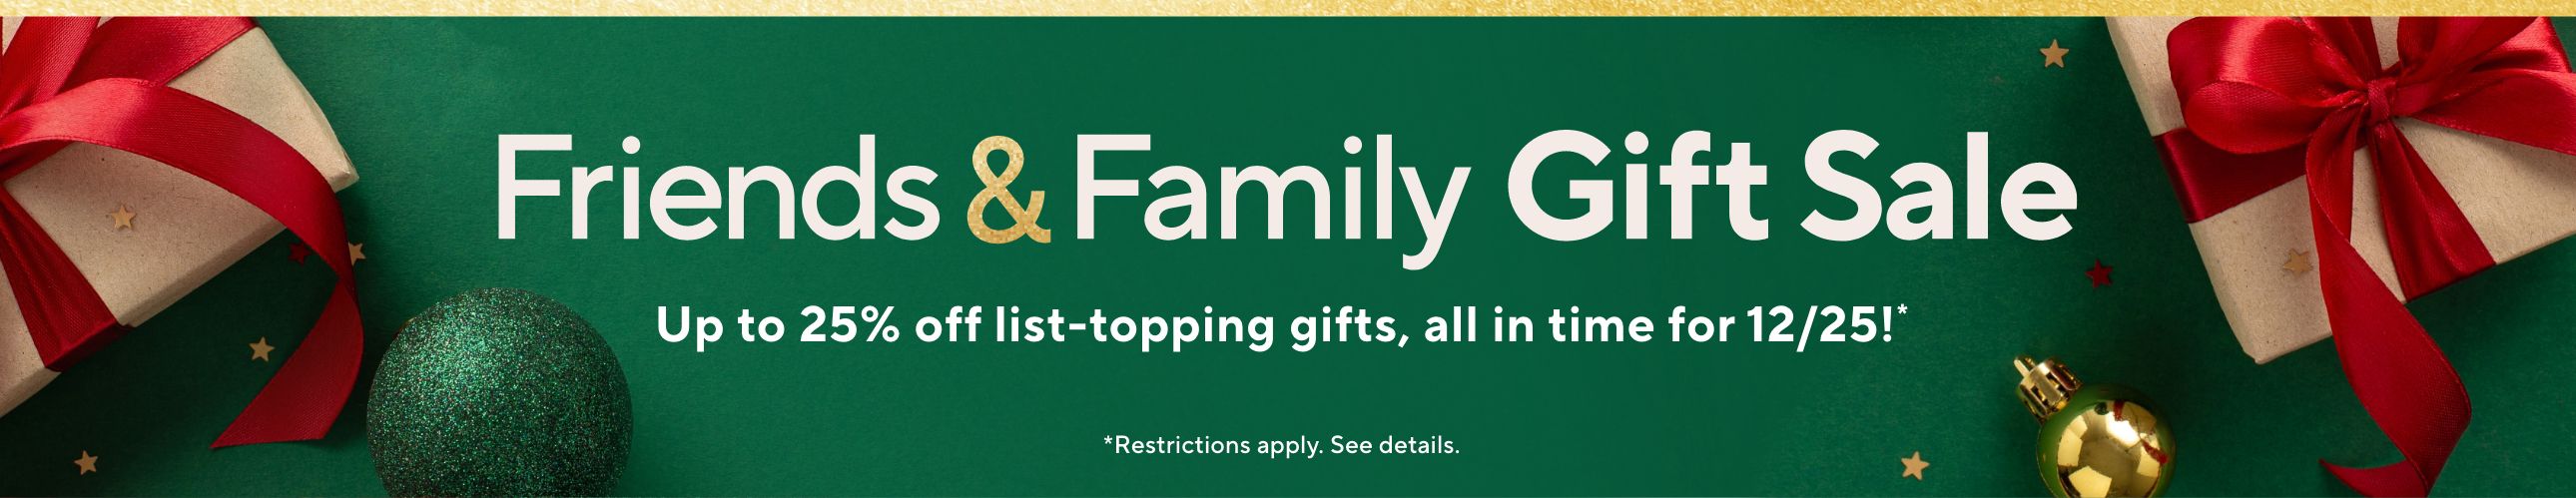 Friends & Family Gift Sale - Up to 25% off list-topping gifts, all in time for 12/25!*     *Restrictions apply. See details.   